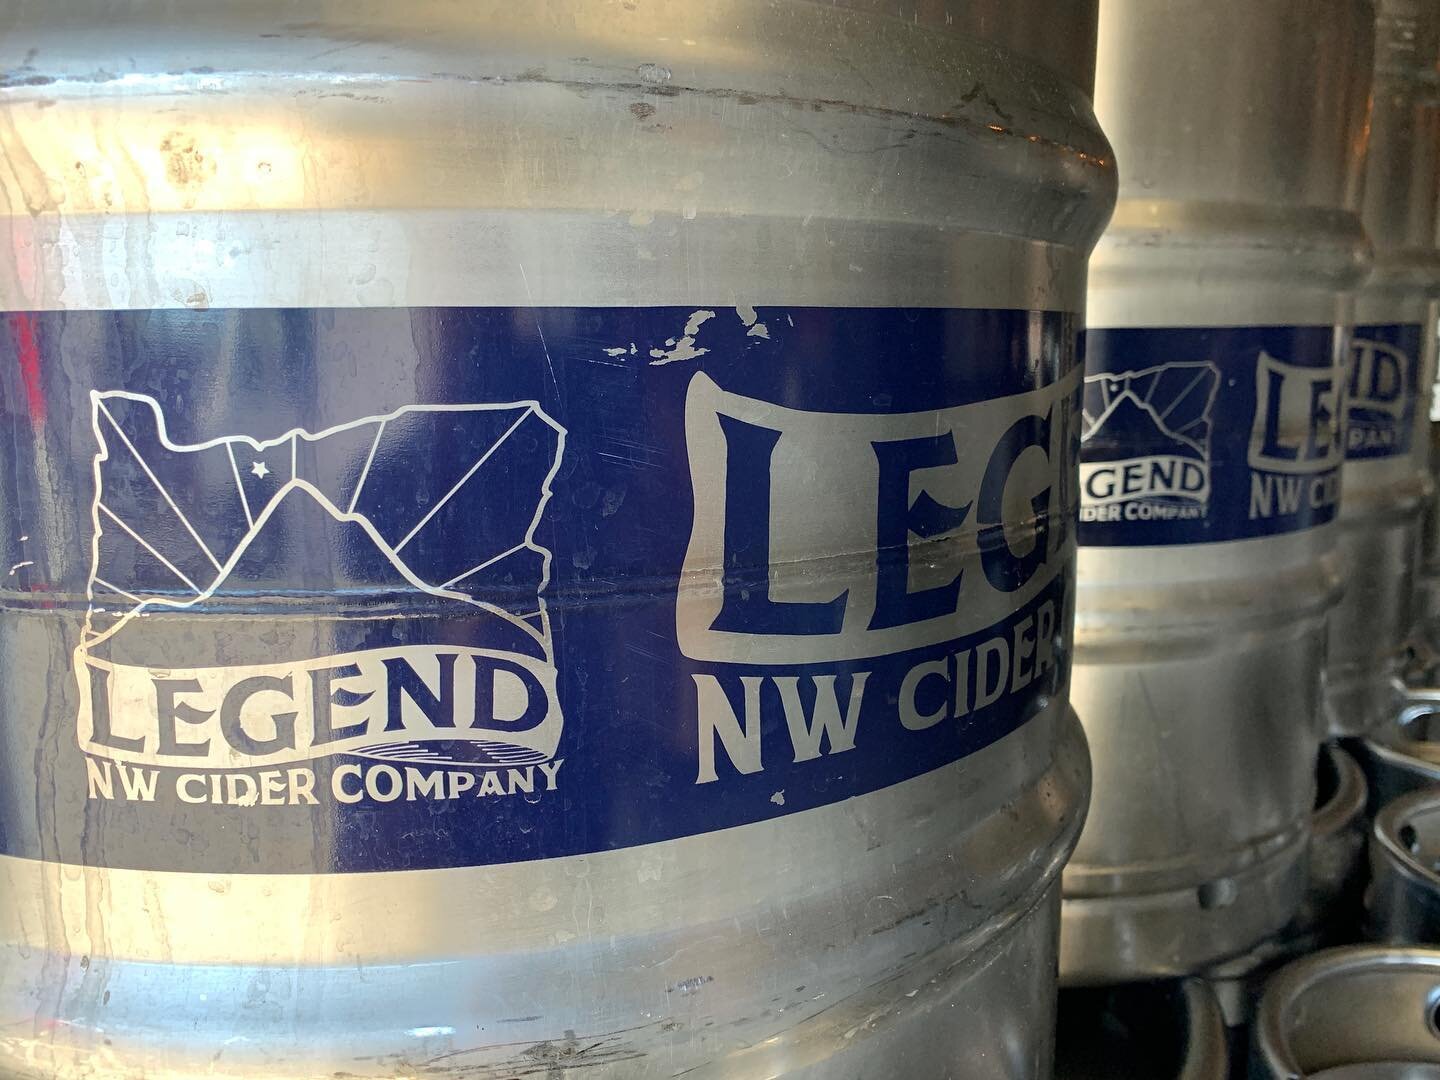 Stop scrolling and come get a refreshment with cool humans.  Be Legendary @legend_cider #adifferentkindofdog #inlapine